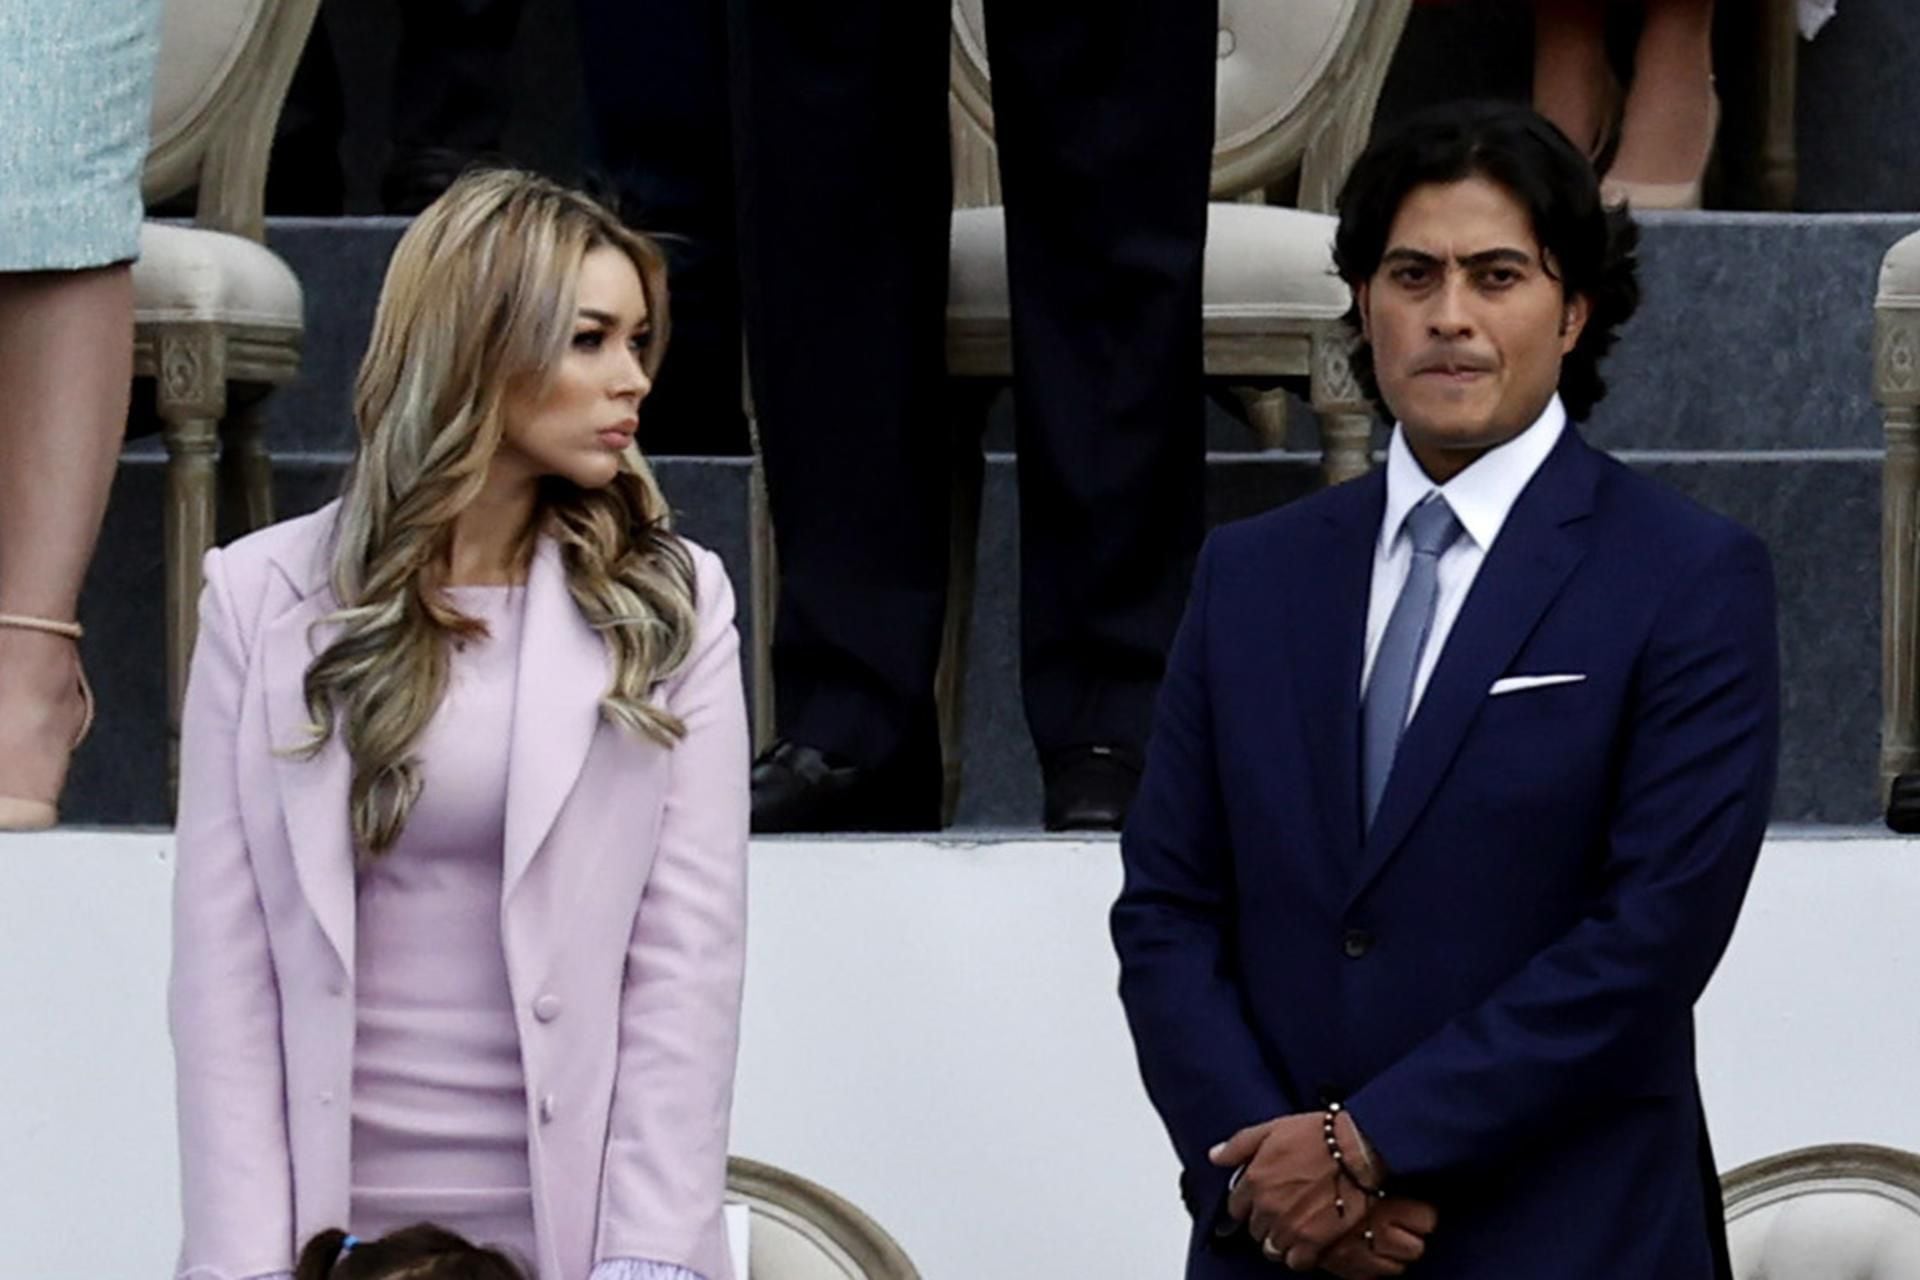 File photo dated August 7, 2022, showing Nicolás Petro Burgos, son of President Gustavo Petro, together with his ex-wife Day Vásquez, at the president's inauguration ceremony.  (EFE/Mauricio Dueñas Castañeda/FILE).